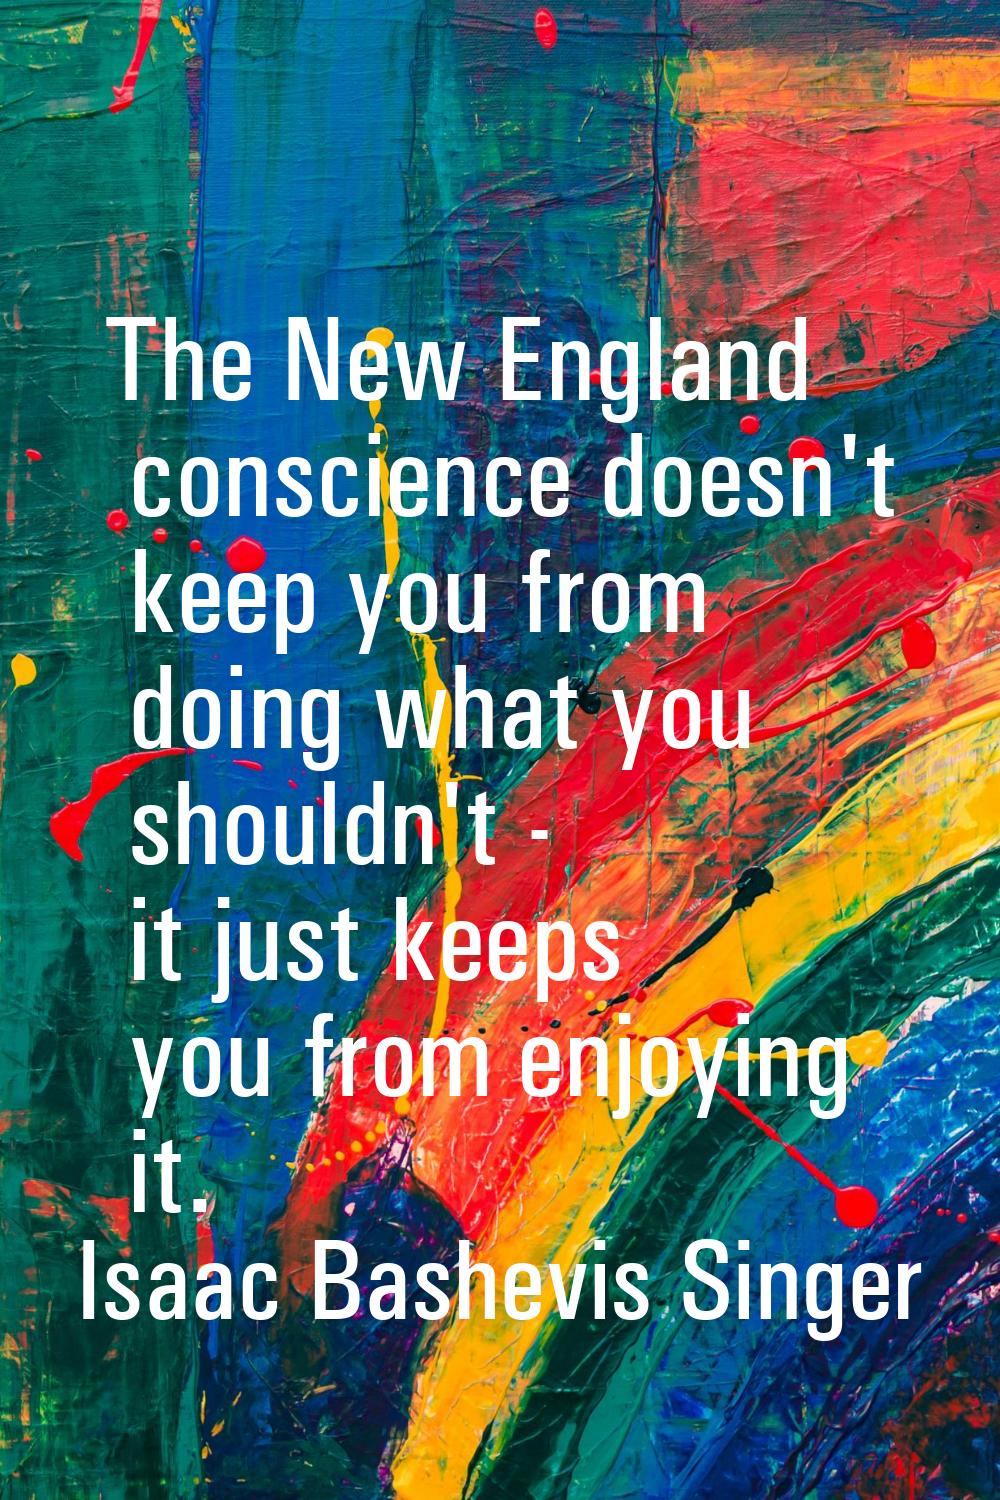 The New England conscience doesn't keep you from doing what you shouldn't - it just keeps you from 